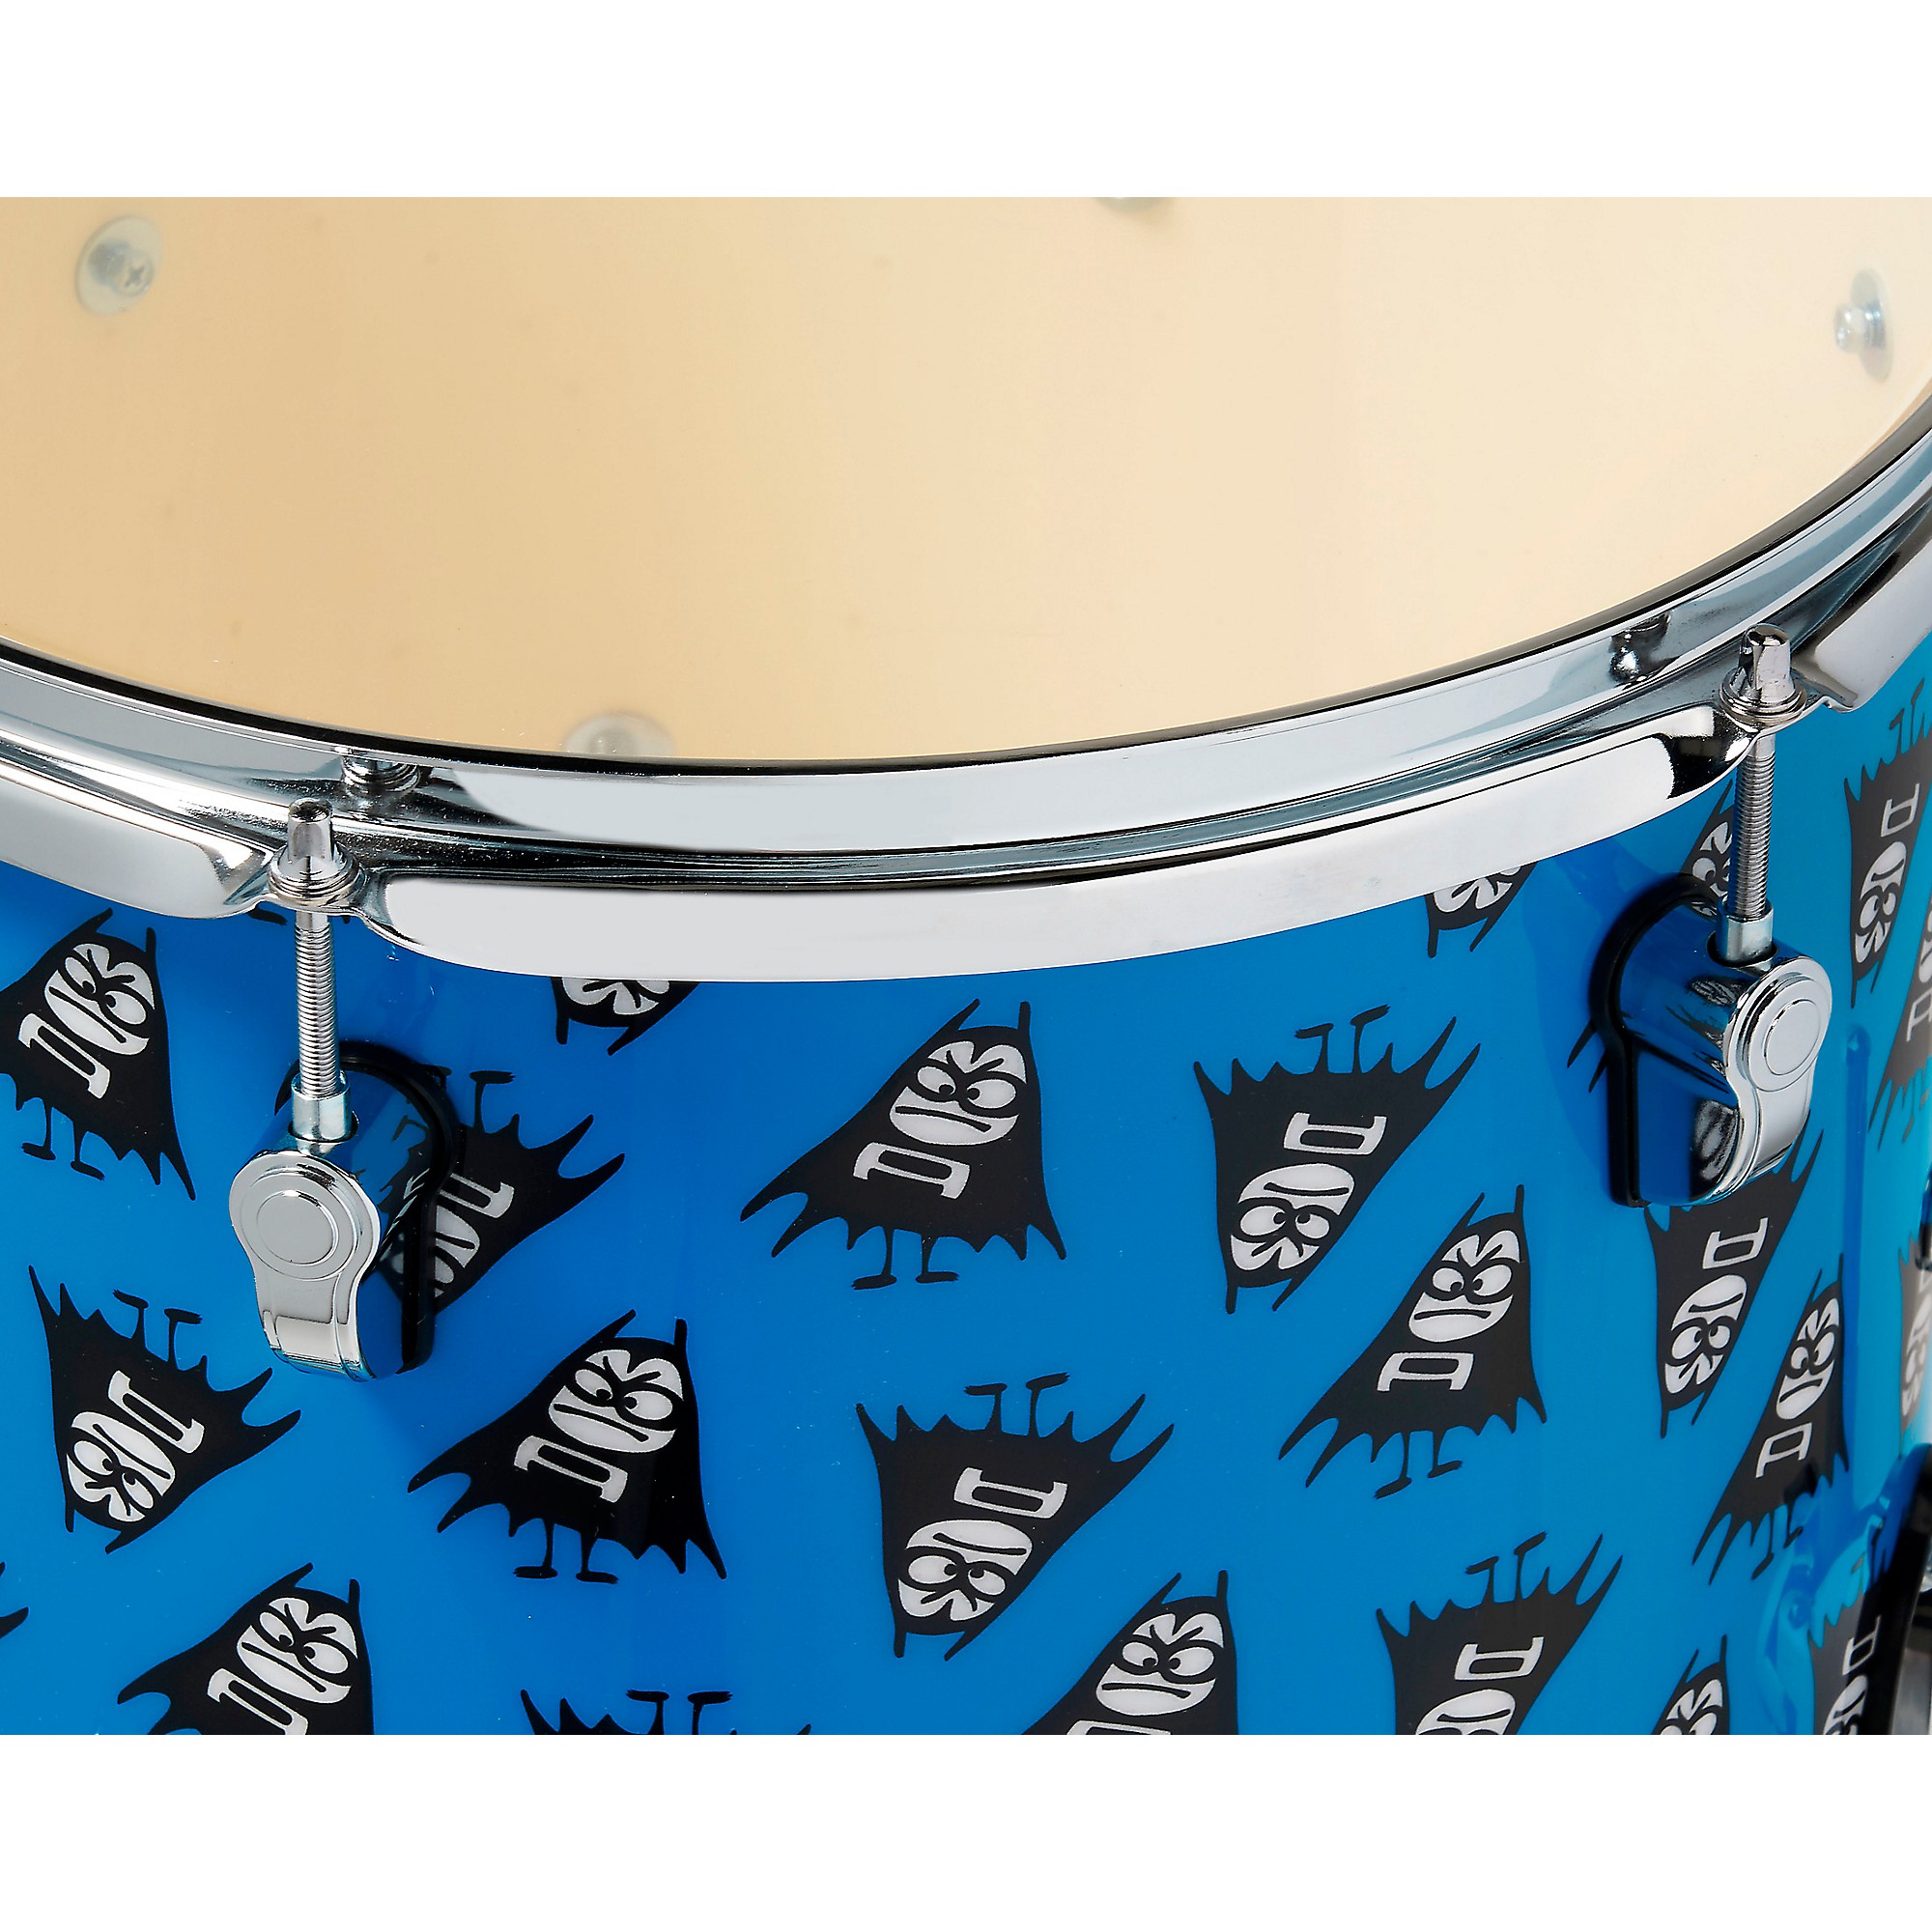 THE AQUABATS! on X: DREAM COME TRUE ALERT!! TODAY PDP launches the Ricky  Fitness signature drum set - THE AQUABATS! ACTION DRUMS! exclusively at  Guitar Centers nationwide!!! Find them on Guitar Center